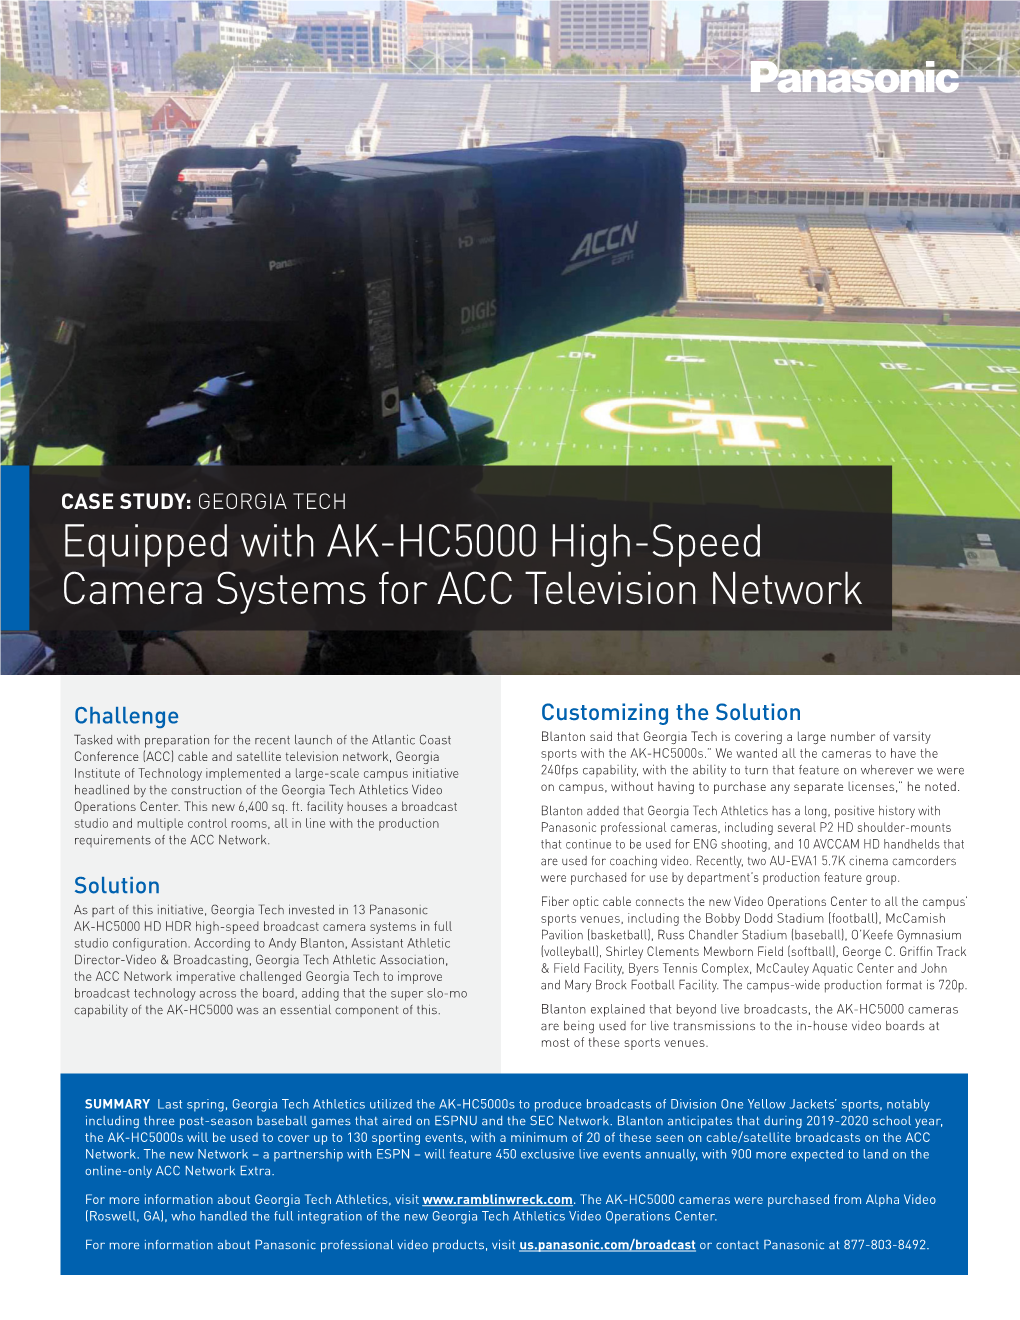 Georgia Tech Athletics Equipped for ACC Network Broadcasts (PDF)